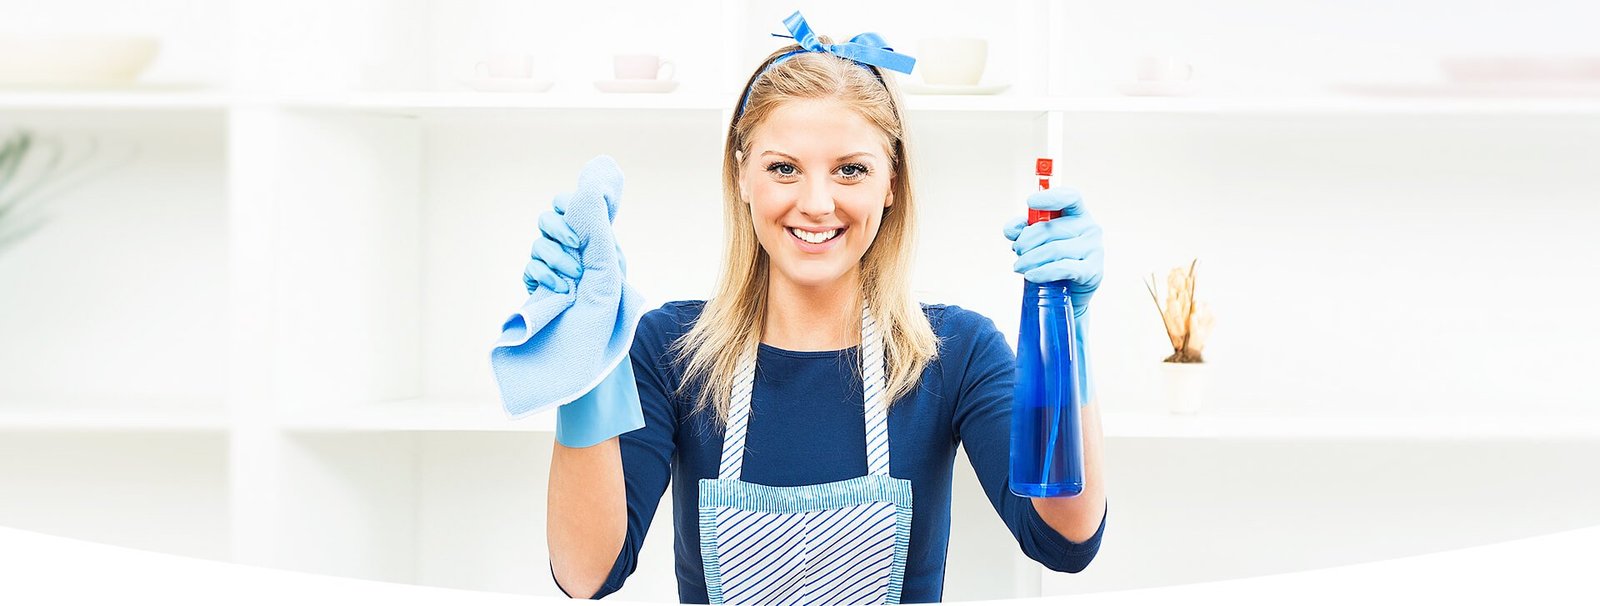 cleaning services Adelaide